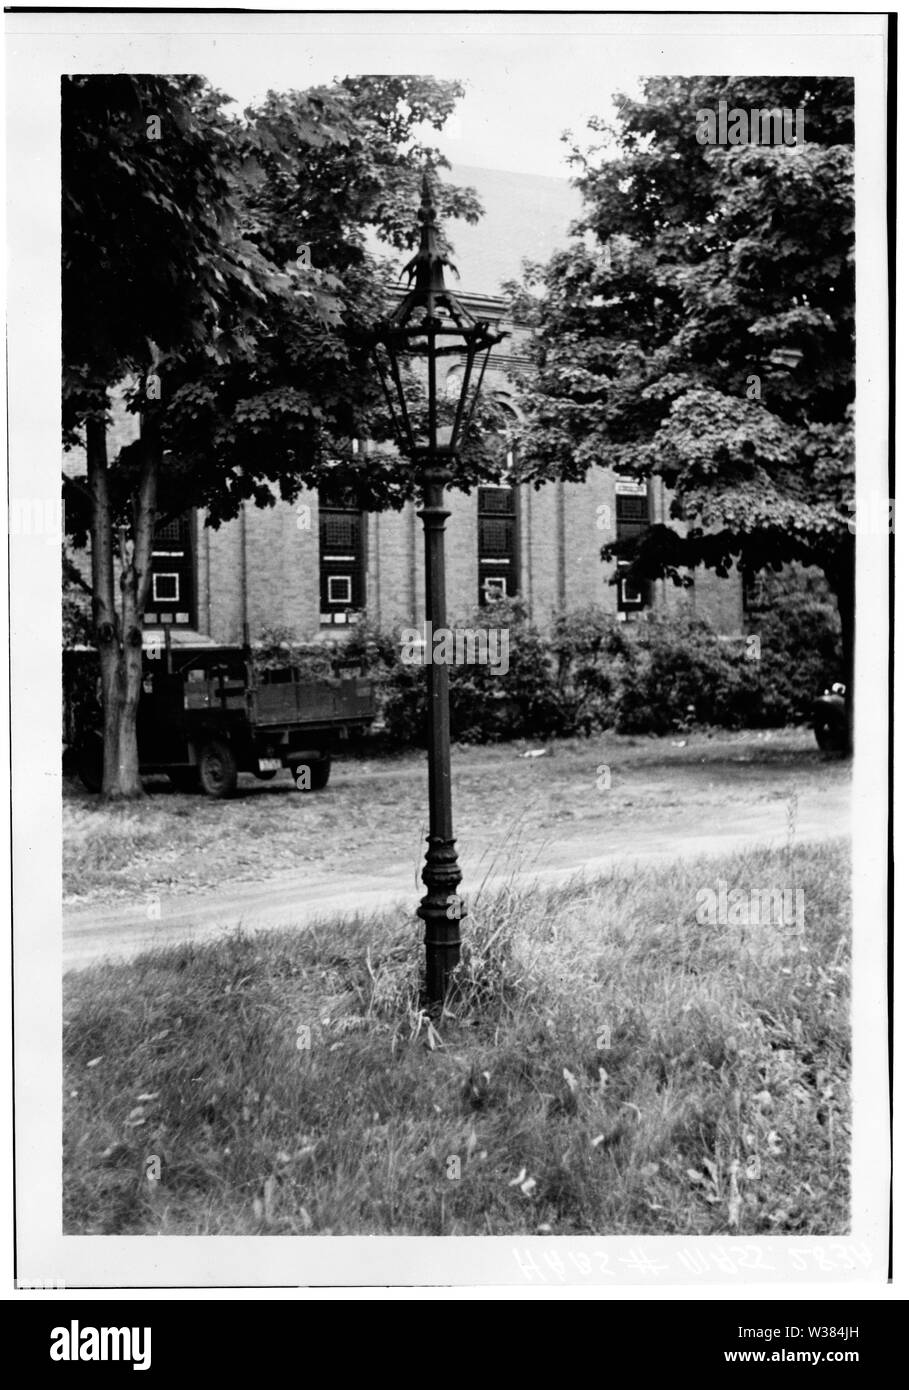 Photograph of Valentine-Fuller House & Garden, 125 Prospect Street, Cambridge, Massachusetts, USA. House built circa 1848; demolished in 1937. Architect unknown. HABS description: Significance: The house, which had an attached carriage house and stable, was one of the most handsomely designed and impressive residences in all Cambridge. The garden, which measured approximately 210' x 510', was unusually large for its neighborhood and was substantially unaltered from its original plan. House and grounds together comprised a particularly fine intact example of an outstanding mid-nineteenth-centur Stock Photo